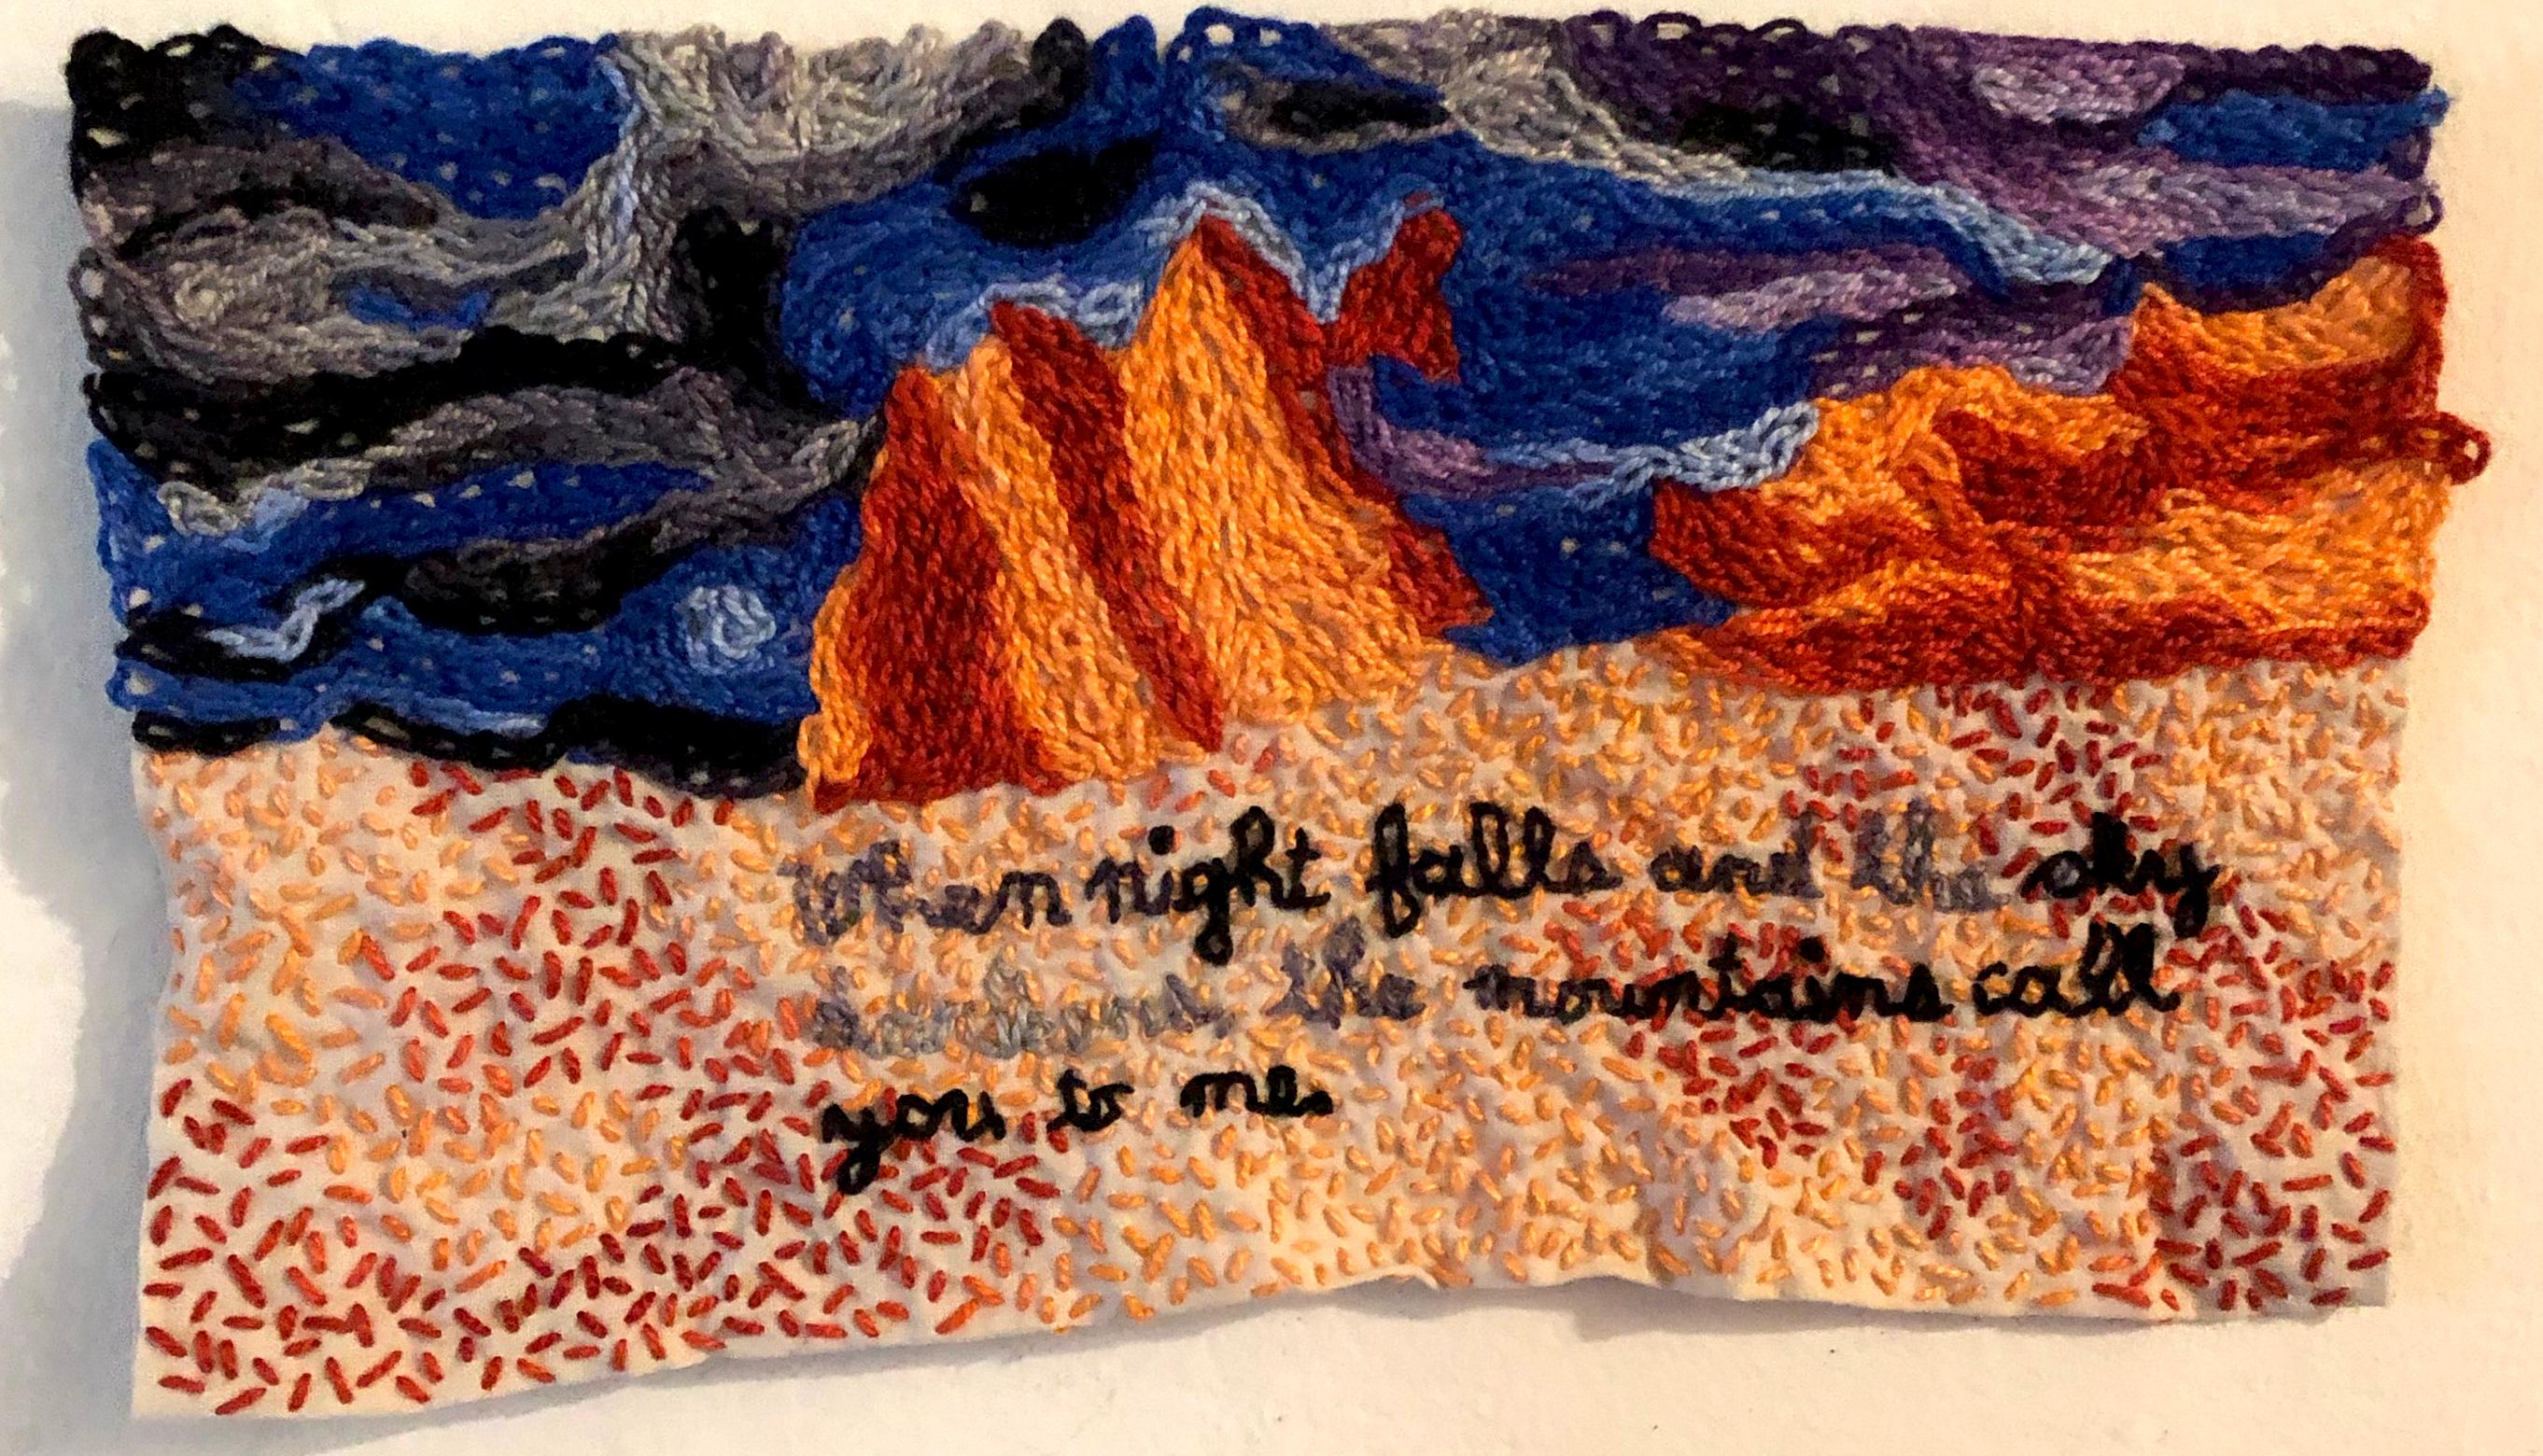 Night Falls - narrative embroidered fabric with landscape, sky and mountains - Mixed Media Art by Iviva Olenick